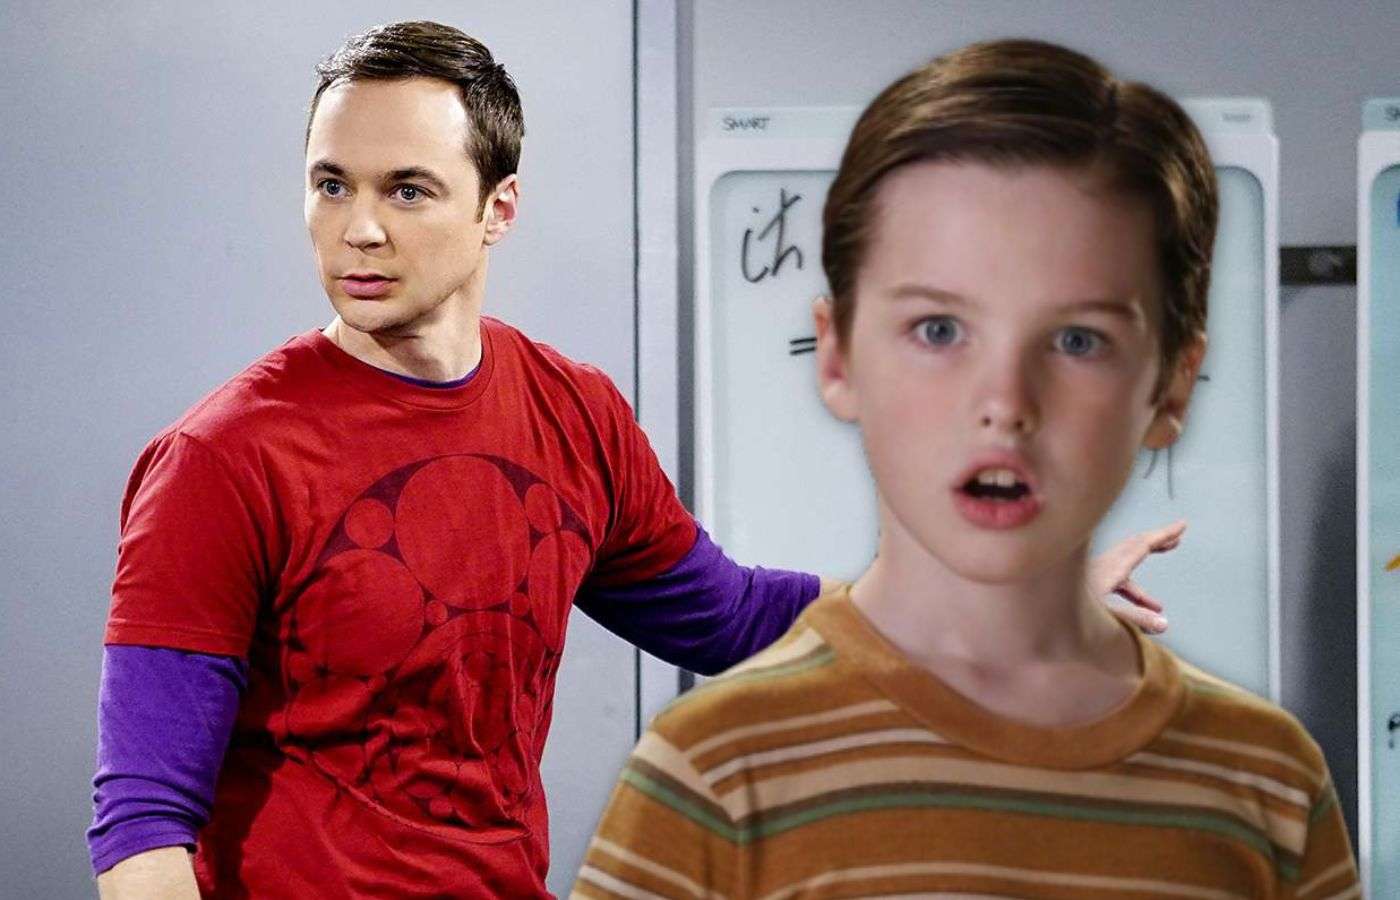 Jim Parsons and Iain Armitage as Sheldon Cooper